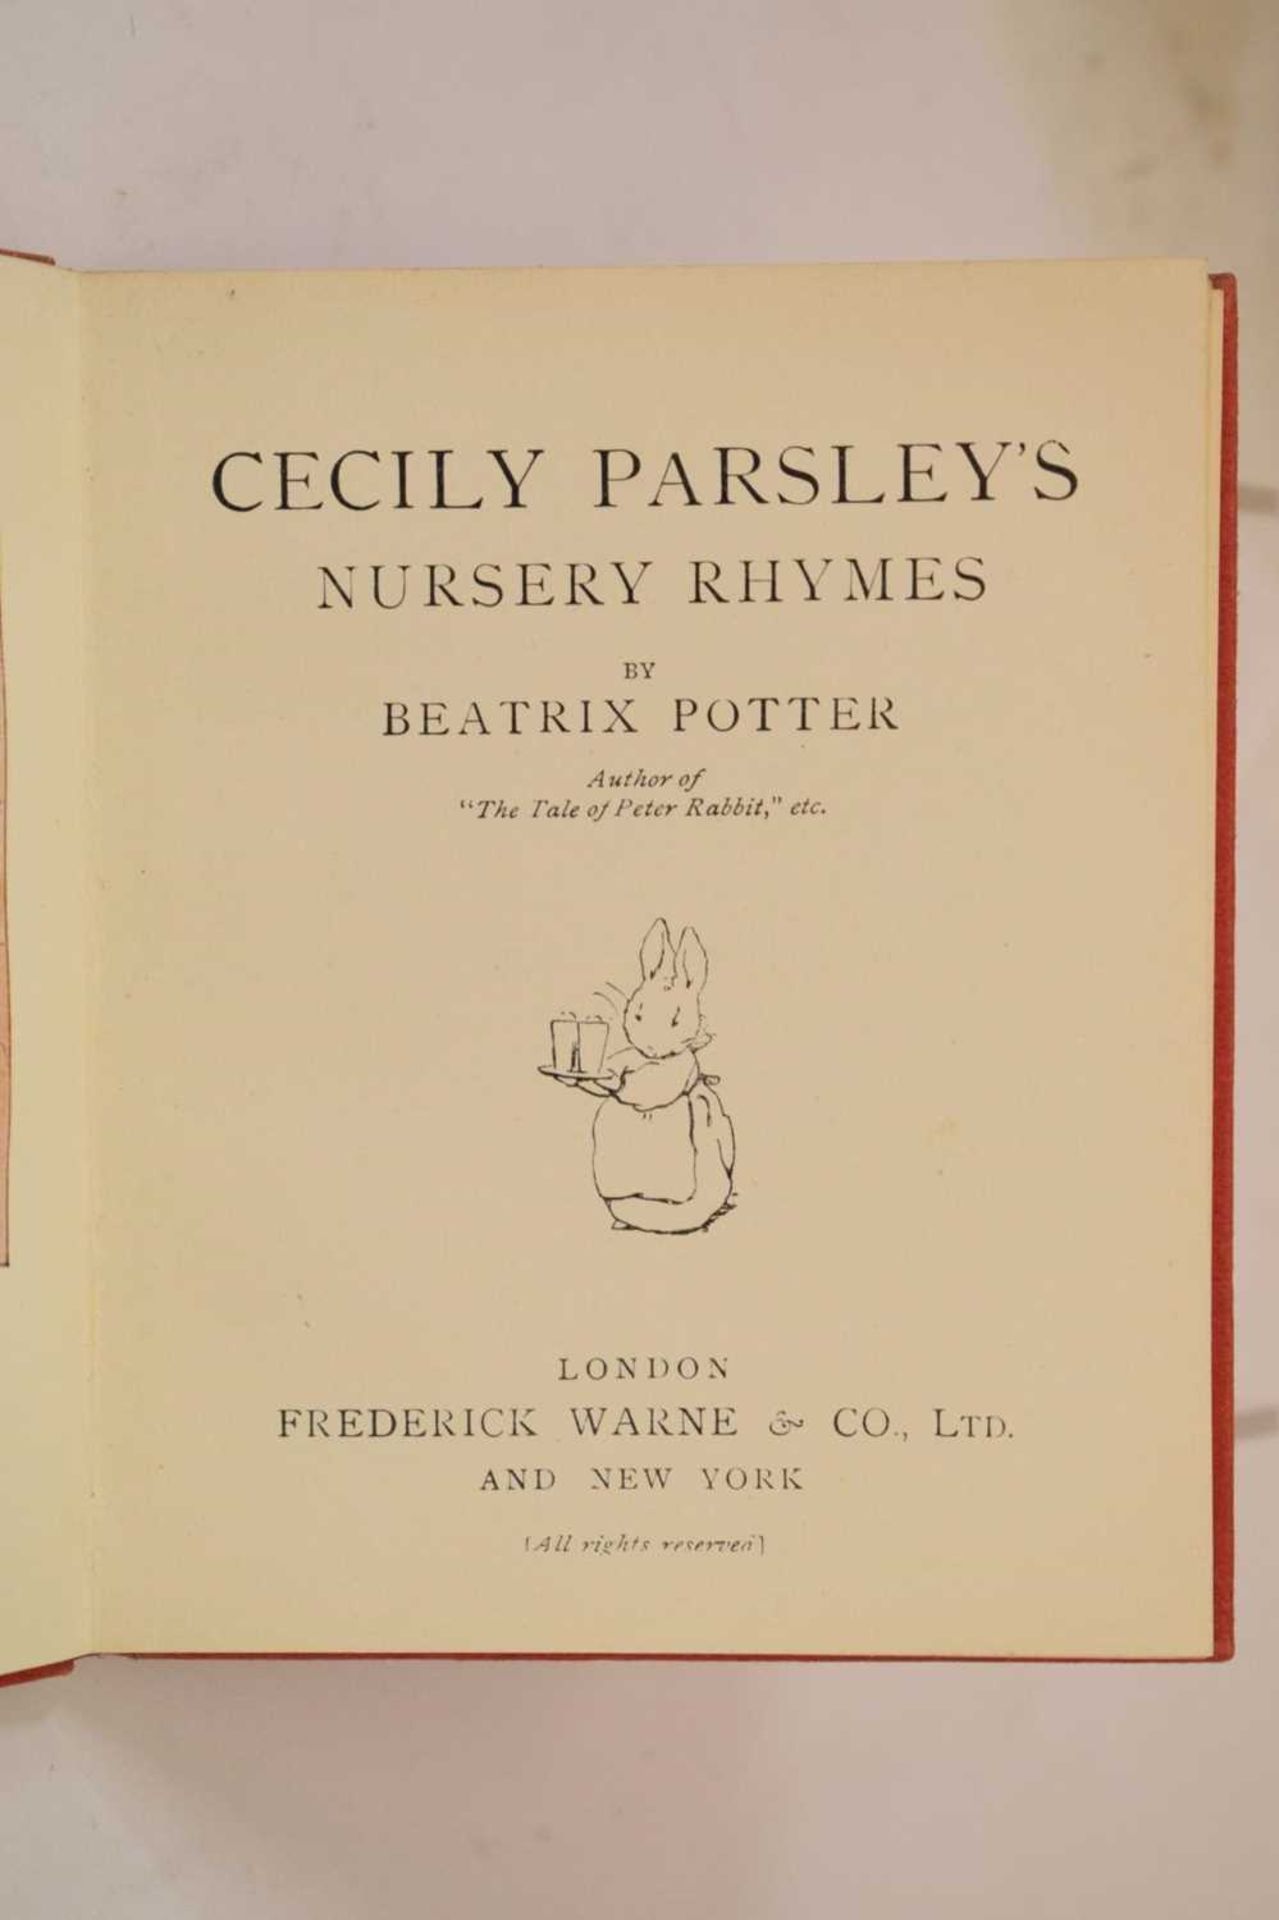 Potter, Beatrix - 'Cecily Parsley's Nursery Rhymes' - First edition - Image 23 of 23